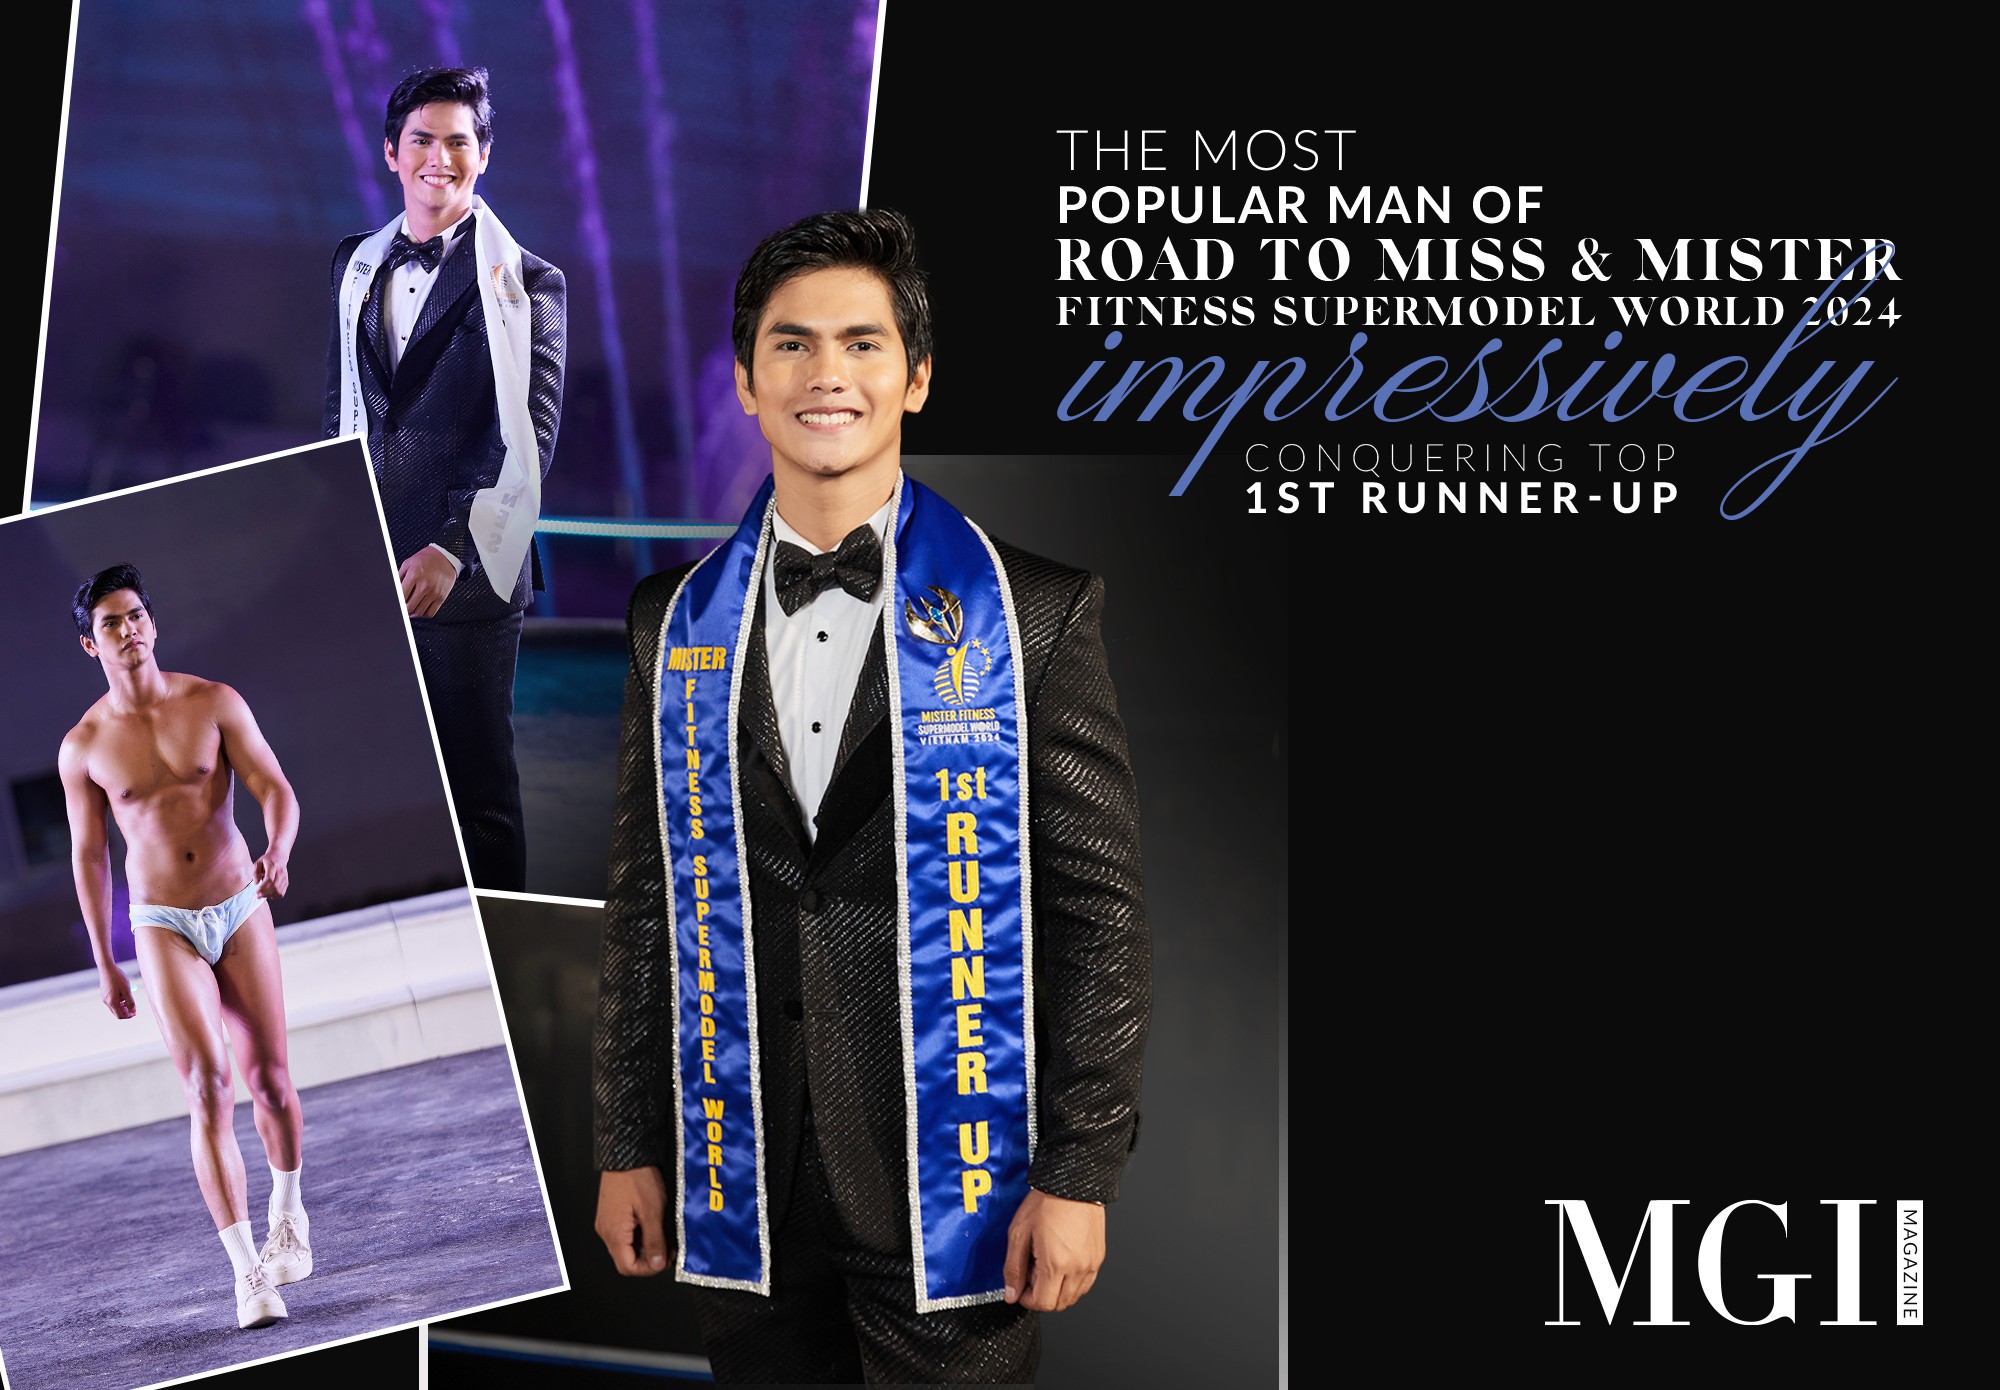 The most popular man of “Road to Miss & Mister Fitness Supermodel World 2024” impressively conquering top 2